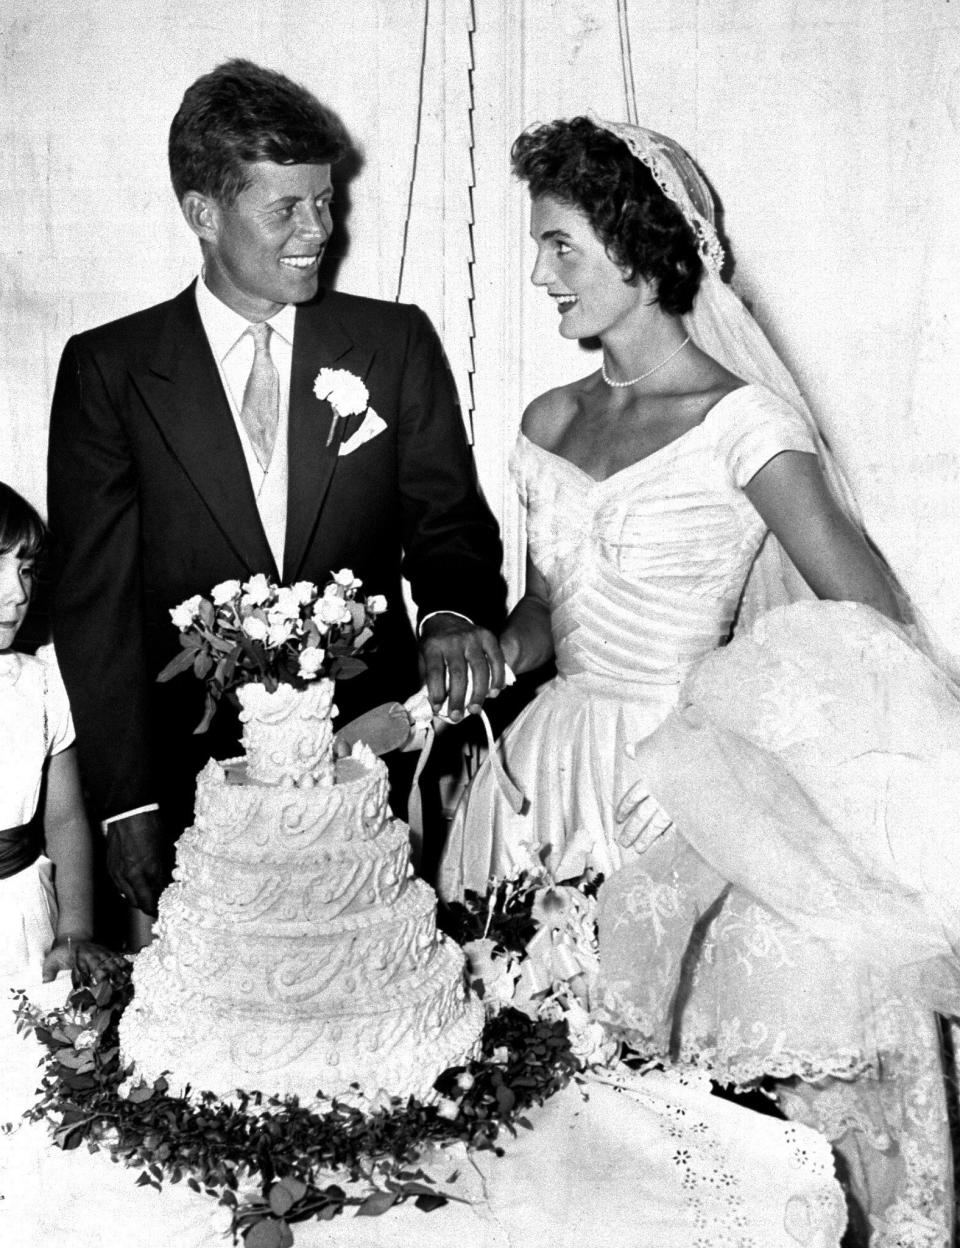 President John F. Kennedy with wife Jacqueline cut the cake at their wedding in Newport, Rhode Island. (Photo by Pat Candido/NY Daily News Archive via Getty Images)